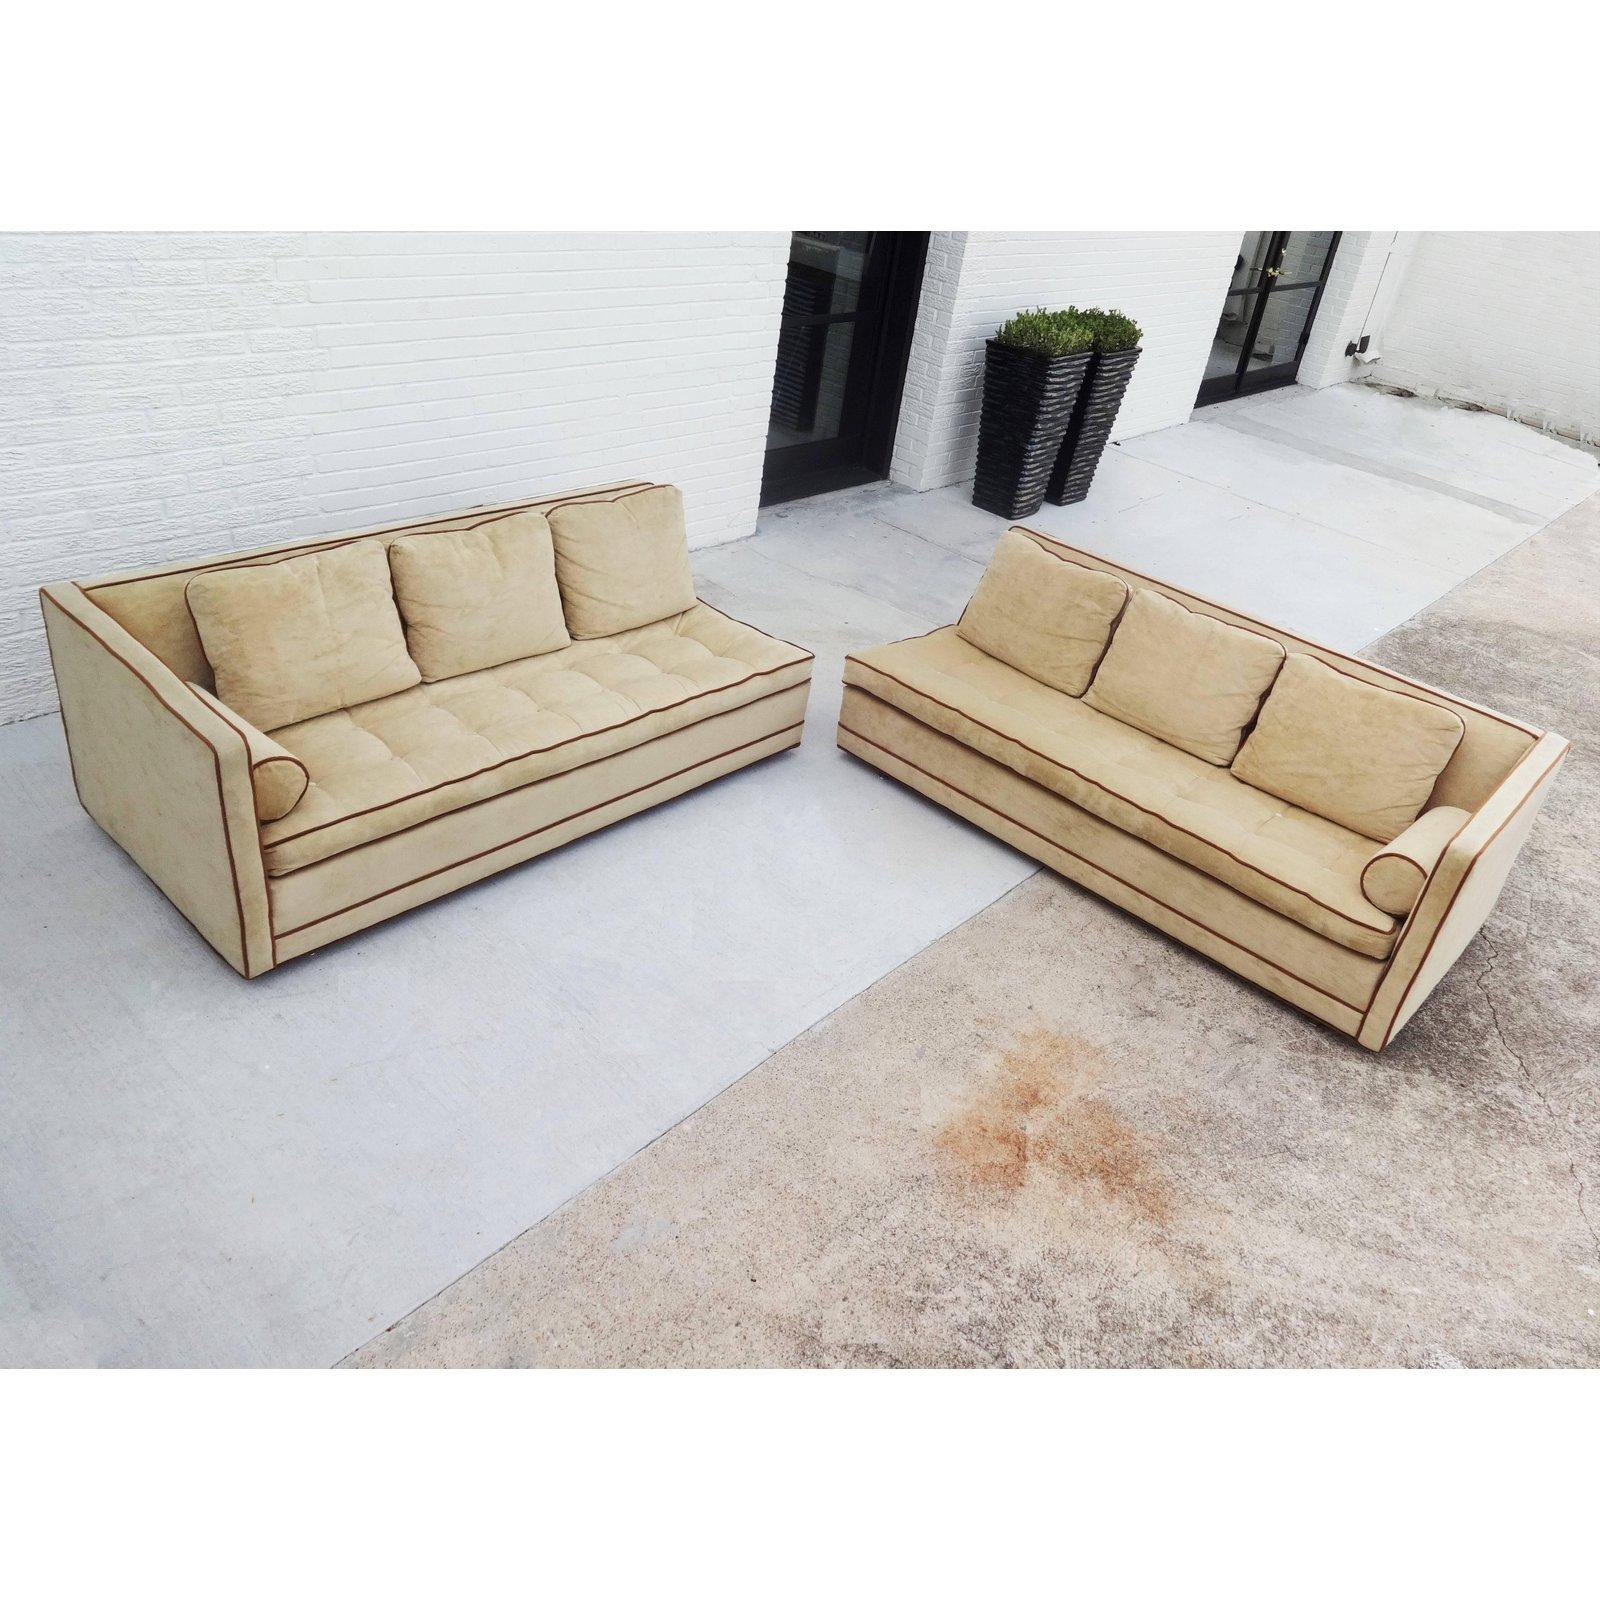 A well-tailored, nicely proportioned and architecturally clean-looking design this two-piece sectional sofa by Harvey Probber. With even arms, tufted seat cushions and six loose cushions on the back. Hidden wood legs add minimalism. Professionally